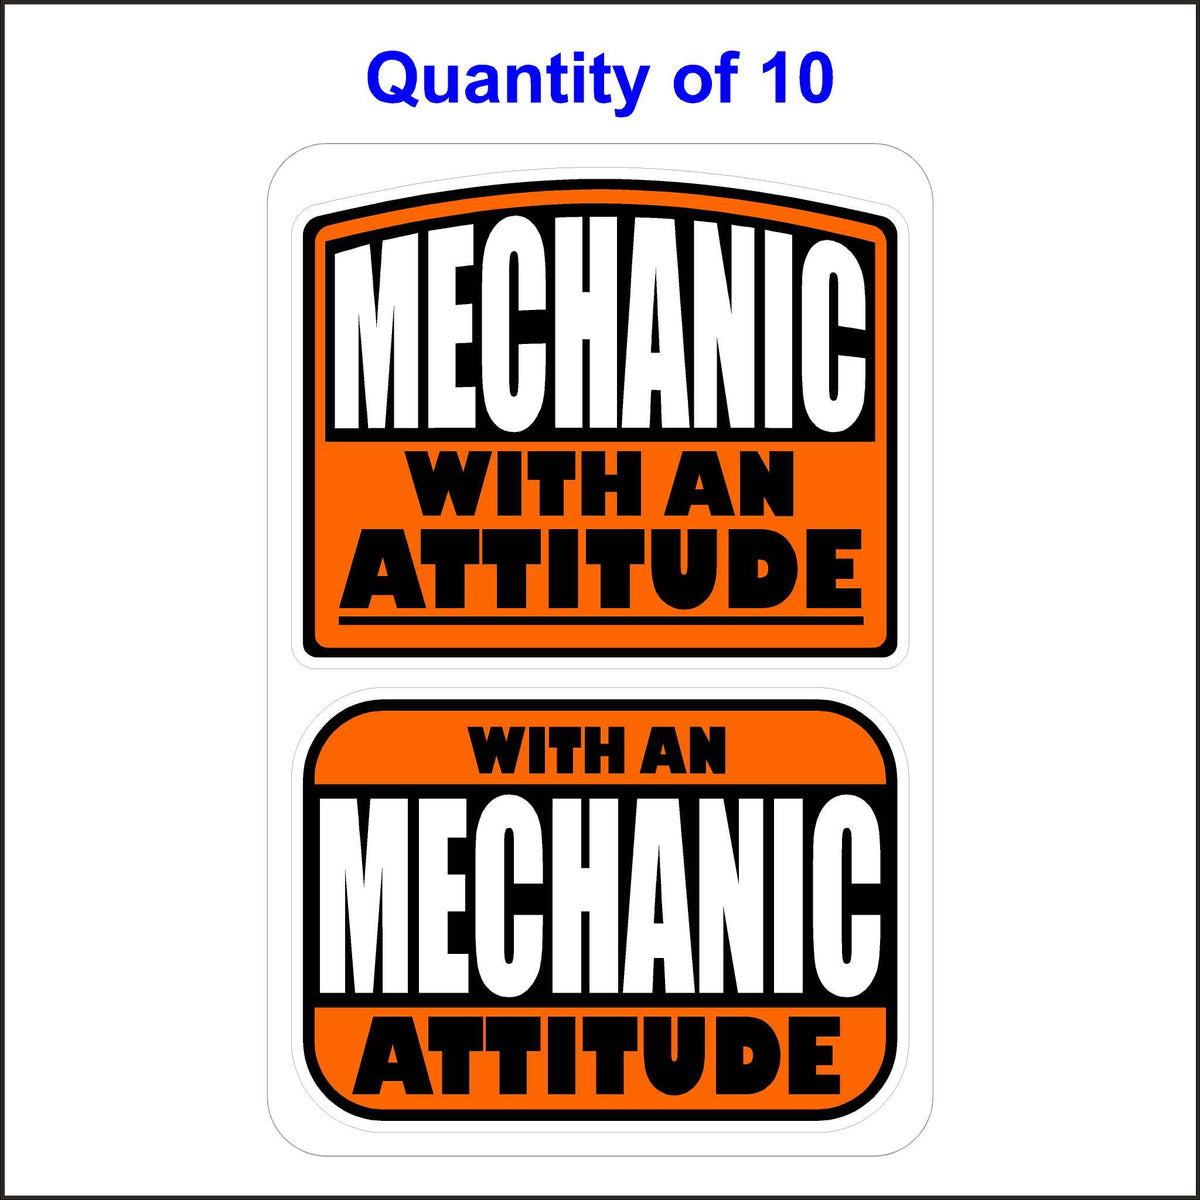 Mechanic With An Attitude Stickers 10 Quantity.